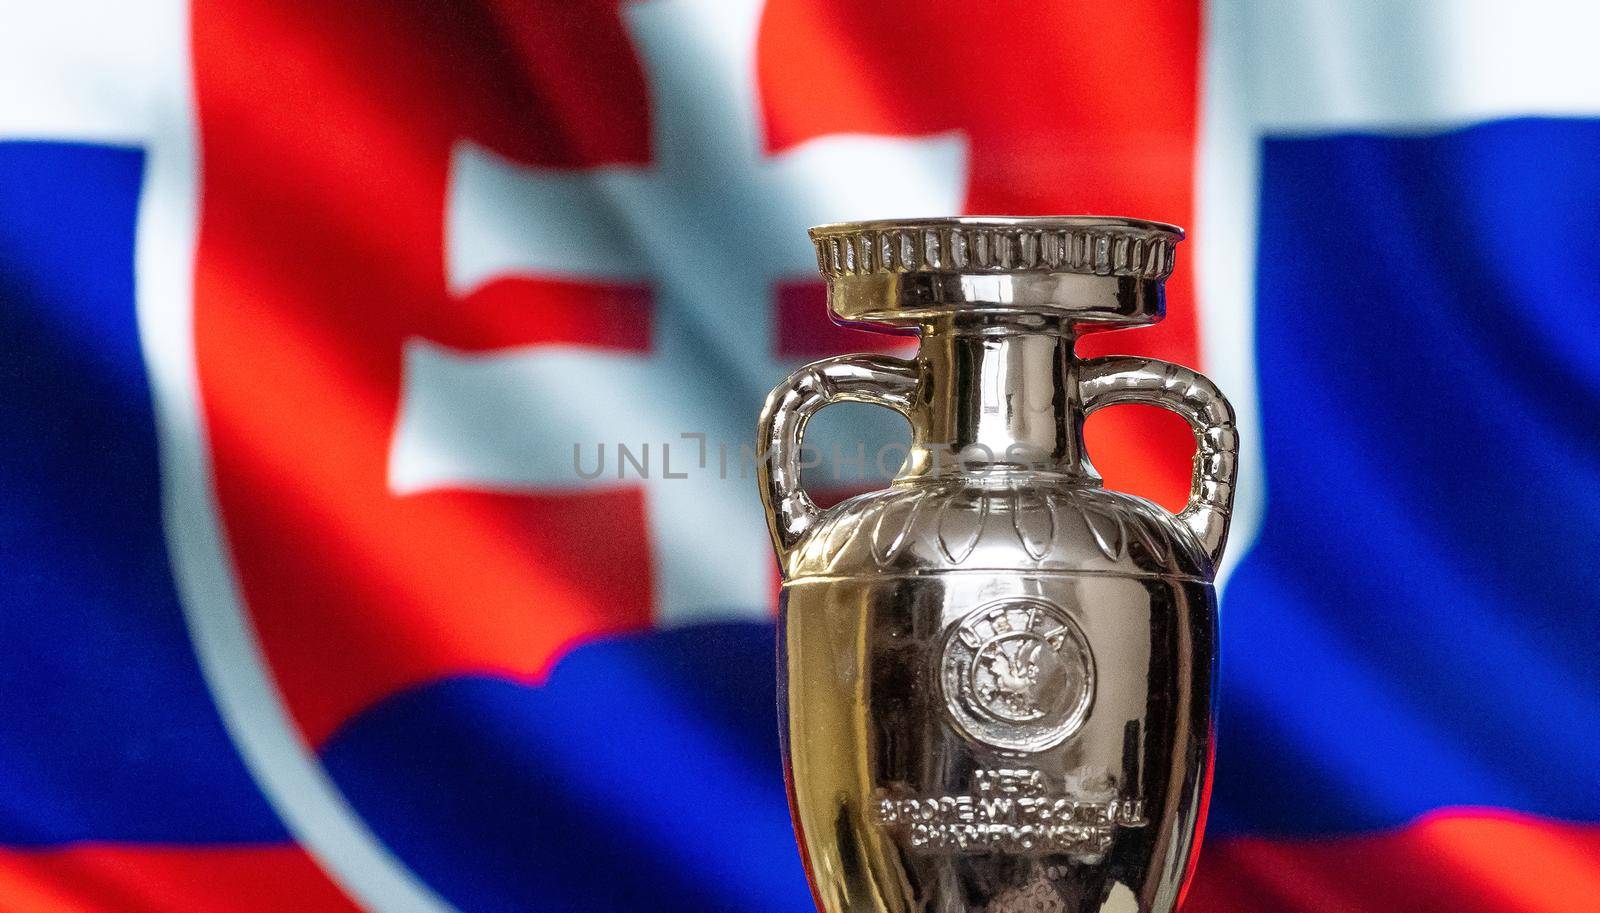 April 10, 2021. Bratislava, Slovakia. UEFA European Championship Cup with the Slovakian flag in the background.